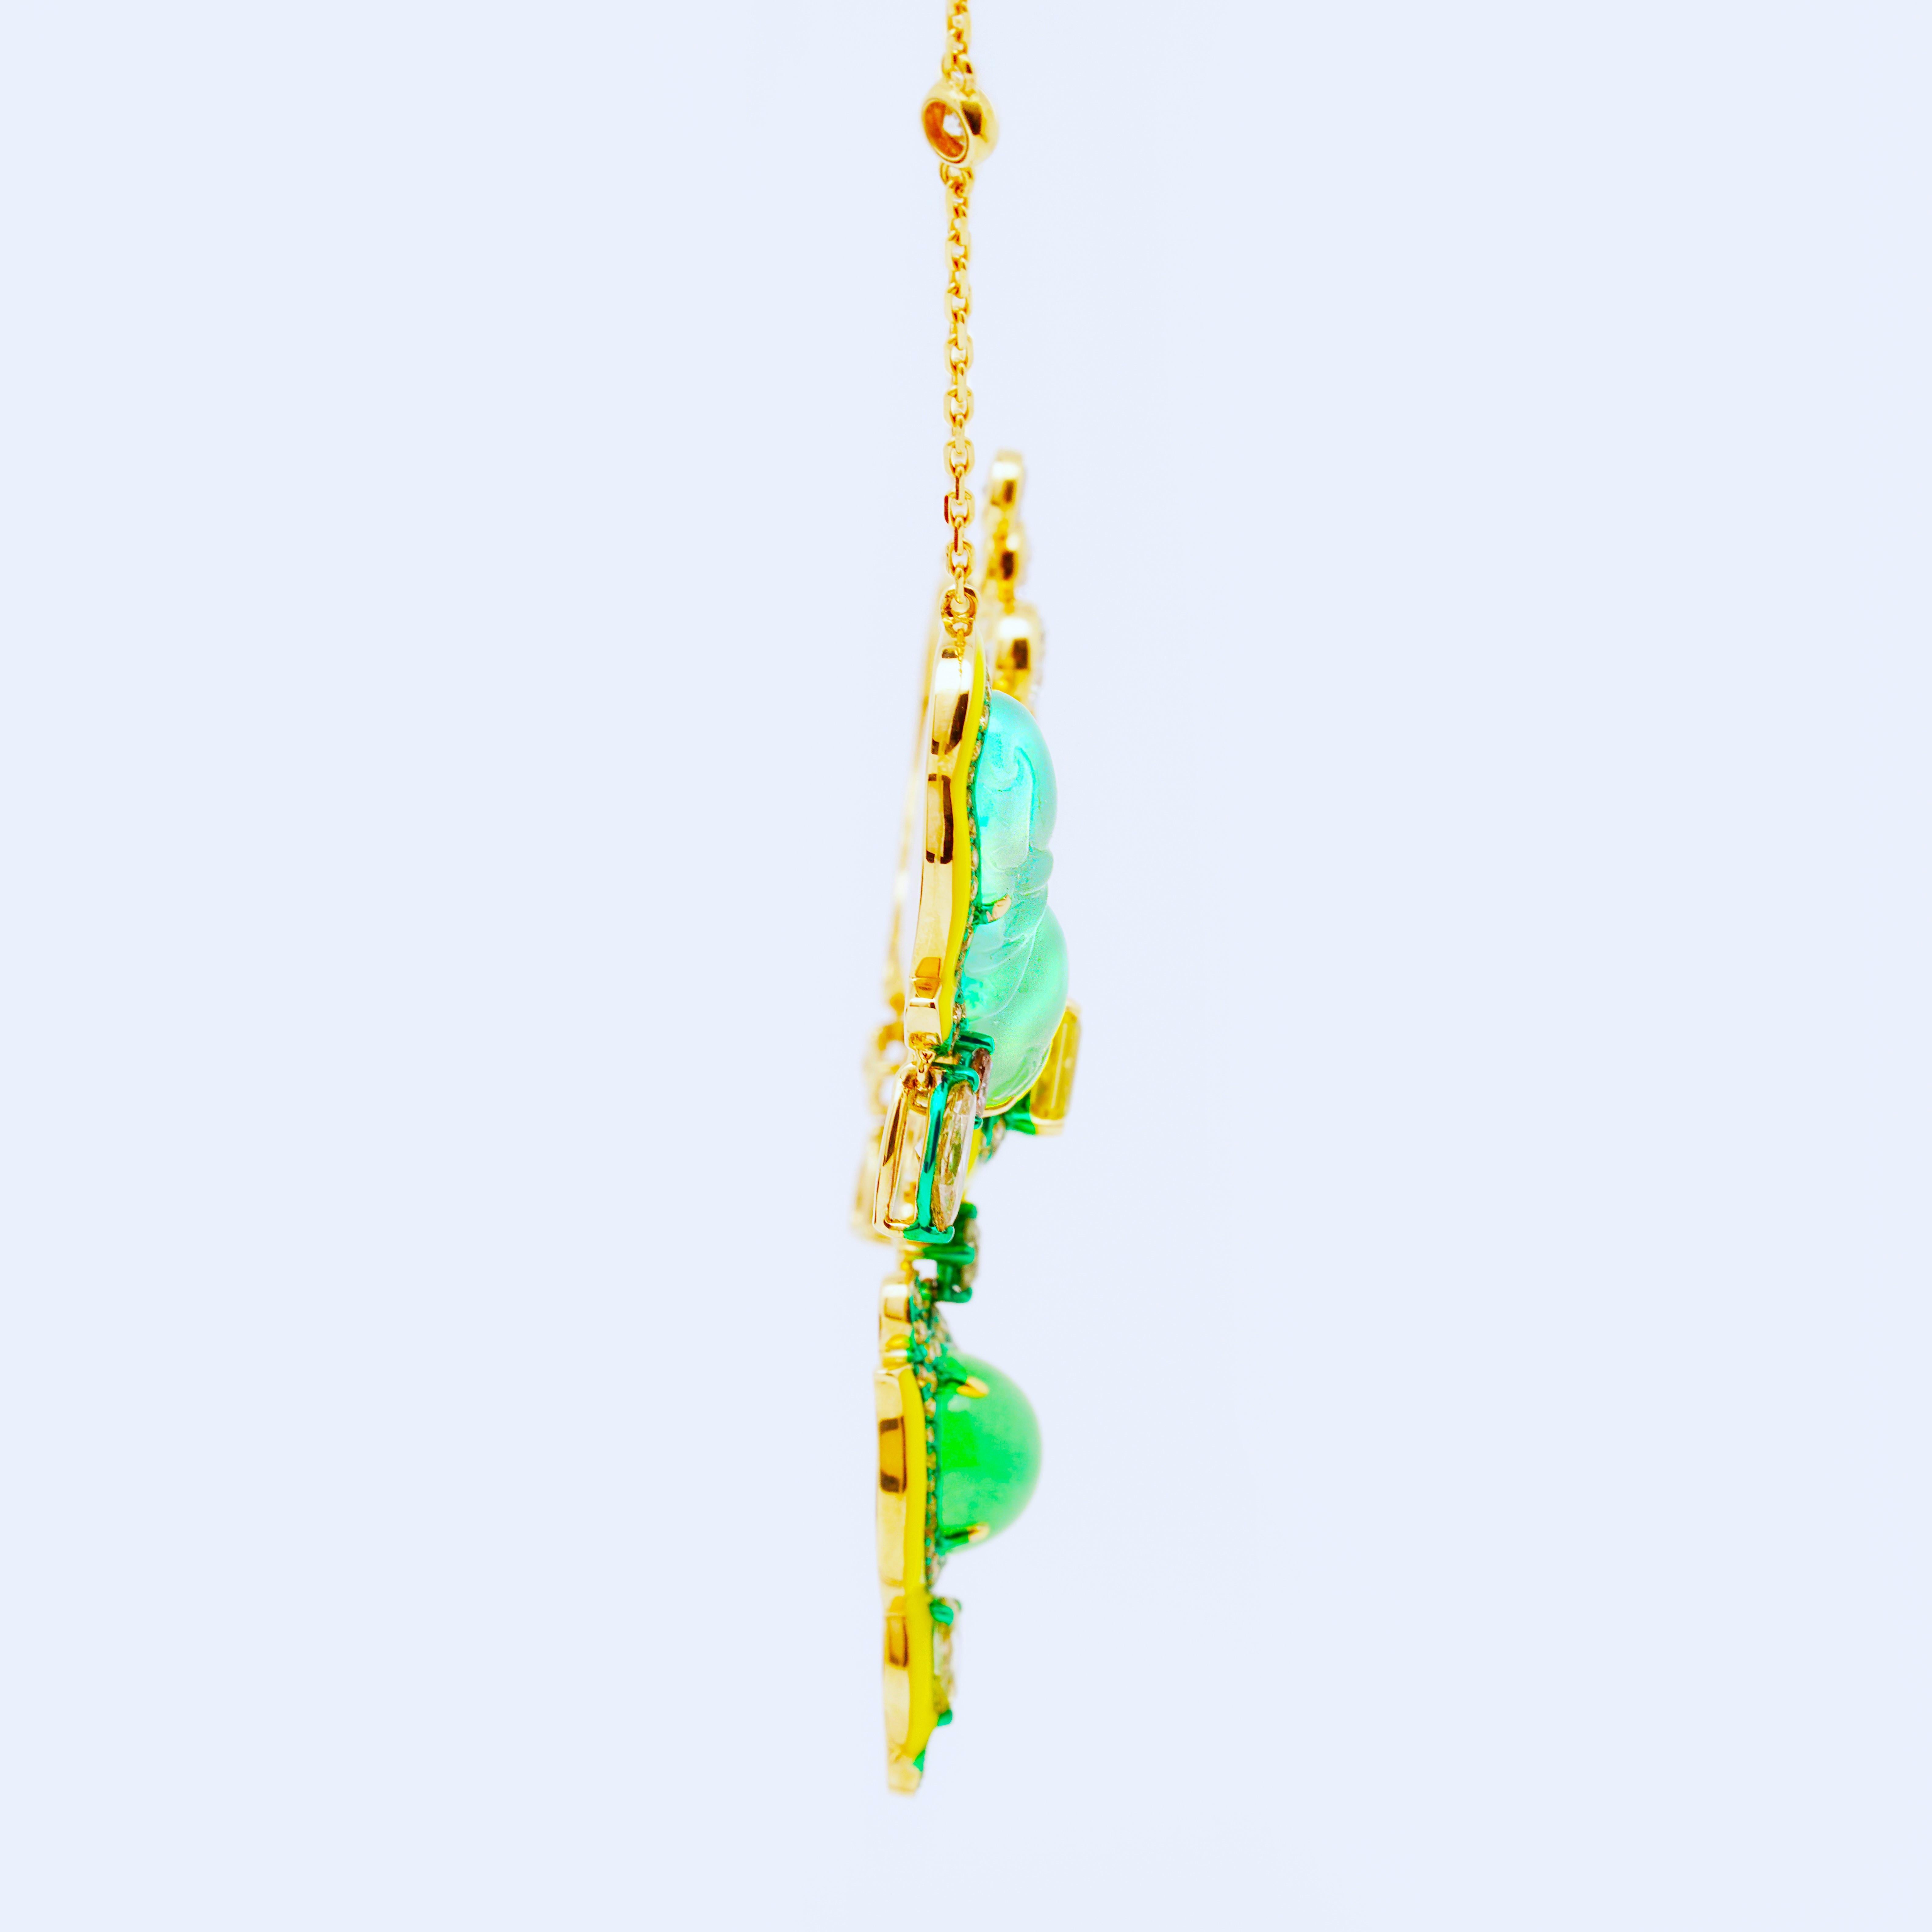 The Golden Fishes' Love Necklace from 'The Jade Dynasty Collection' by Austy Lee. This timeless piece is designed in an adorable and romantic way - with a pair of fishes face-to-face 'bubbling' one another. The Goldfishes are carved Natural Burmese